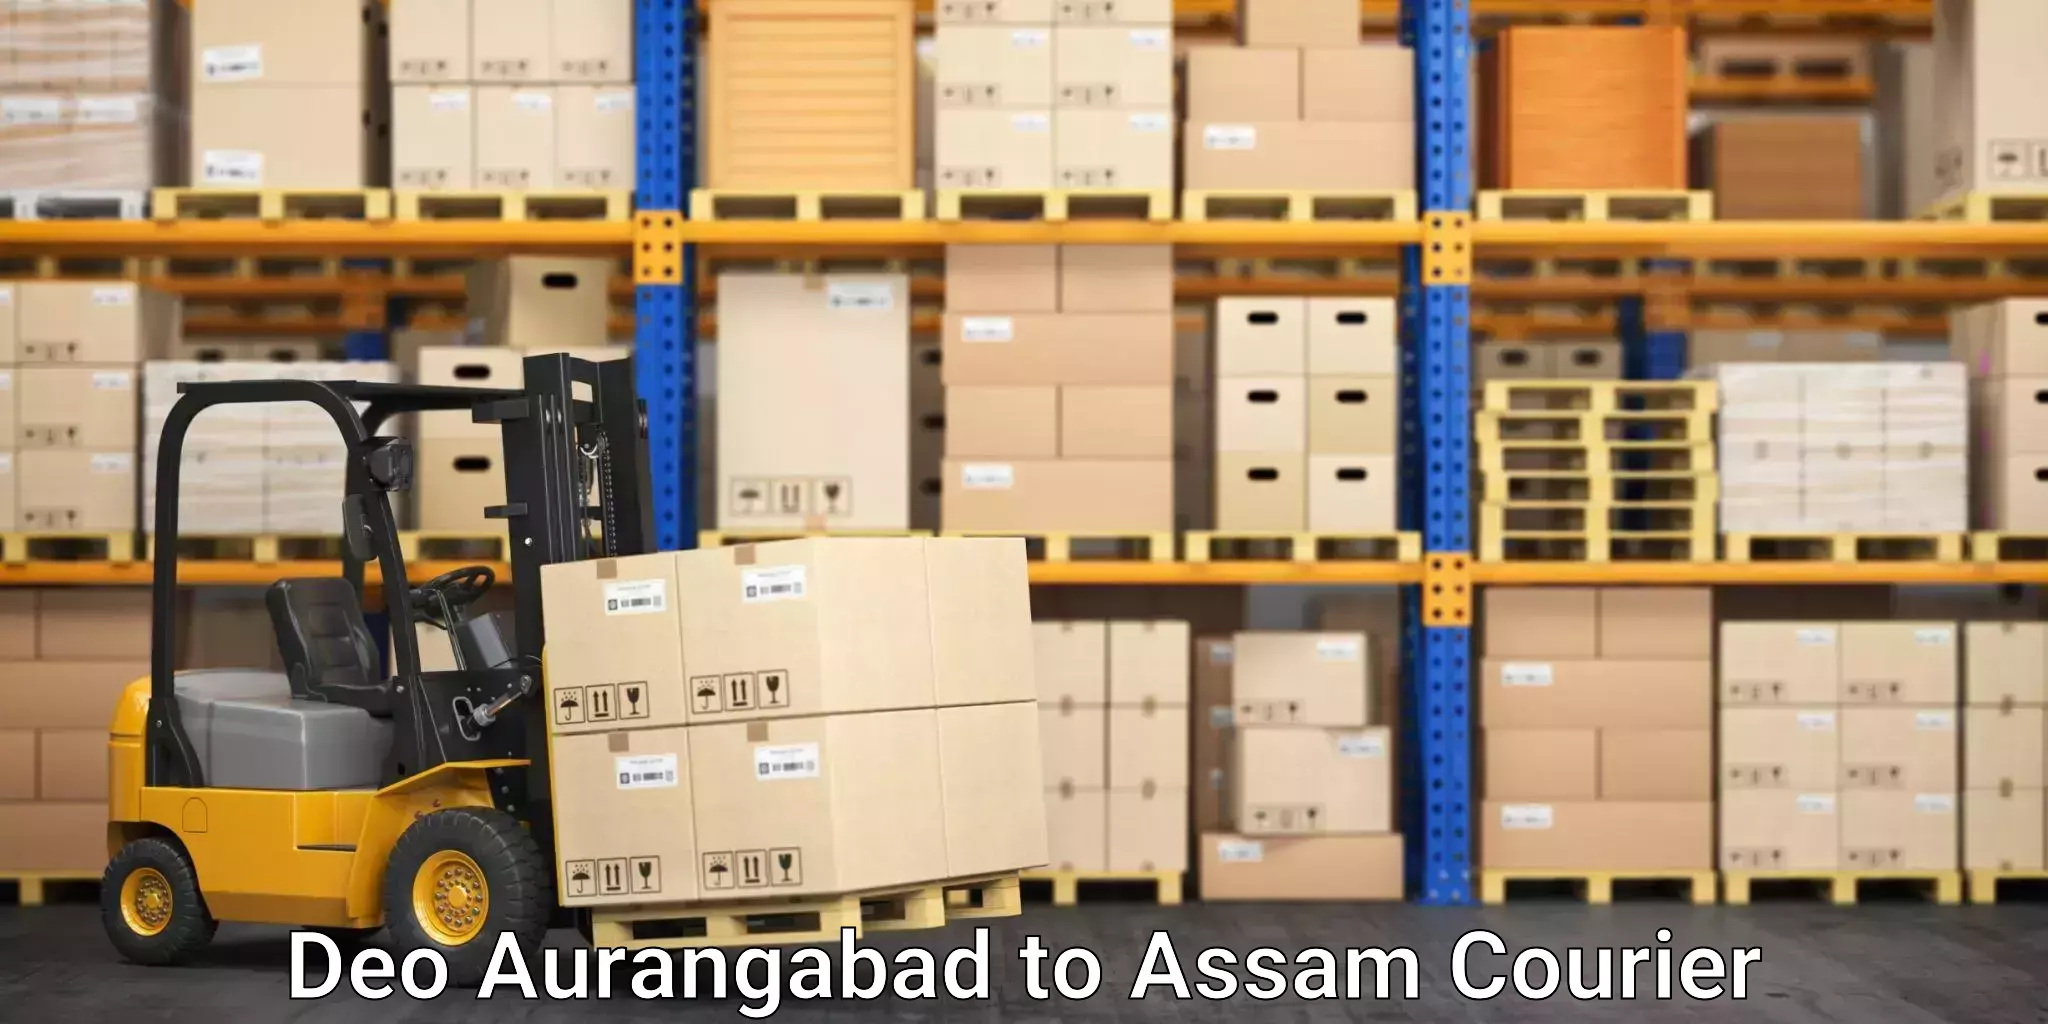 Efficient packing and moving Deo Aurangabad to Rangia